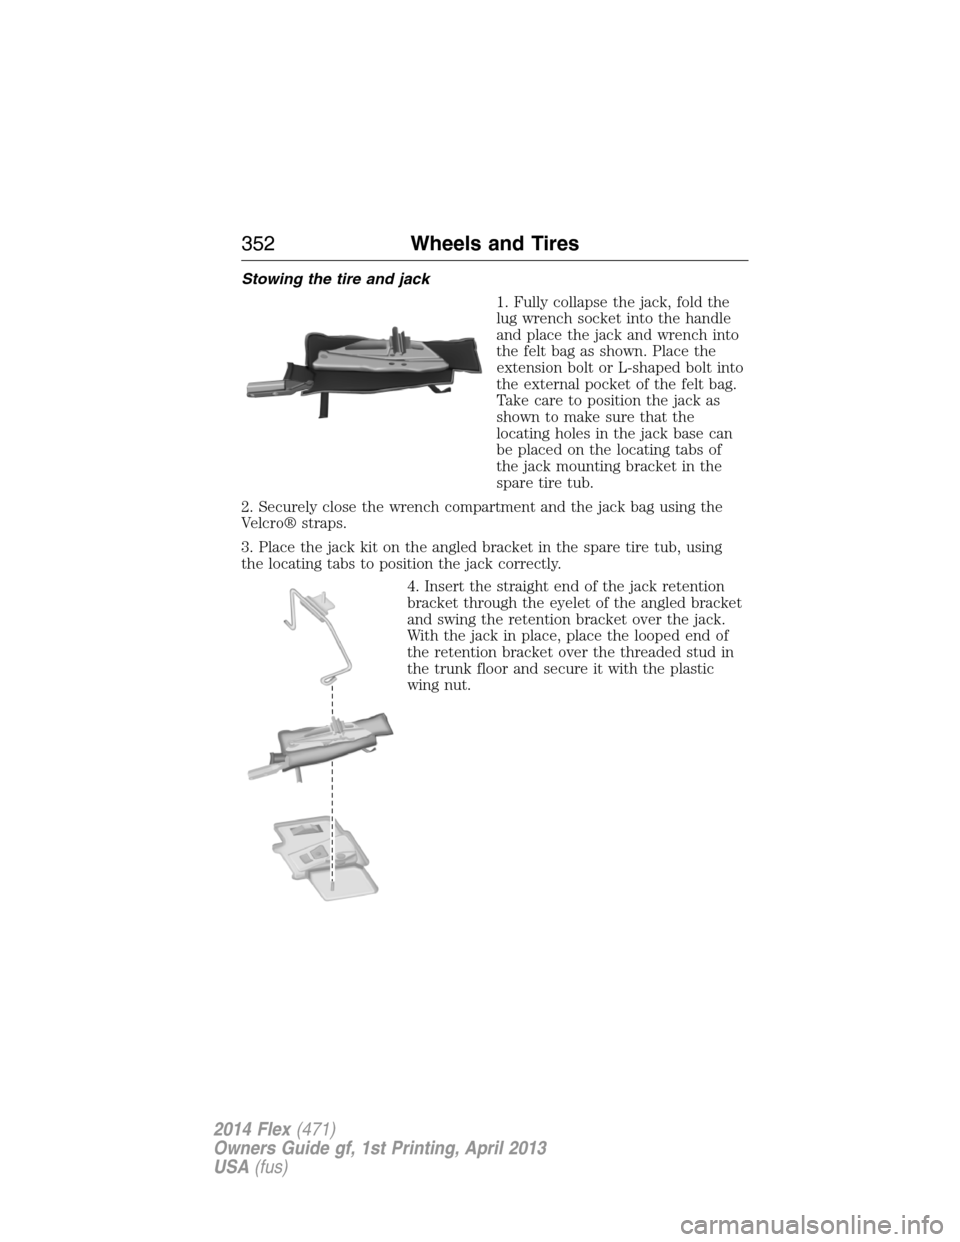 FORD FLEX 2014 1.G Owners Manual Stowing the tire and jack
1. Fully collapse the jack, fold the
lug wrench socket into the handle
and place the jack and wrench into
the felt bag as shown. Place the
extension bolt or L-shaped bolt int